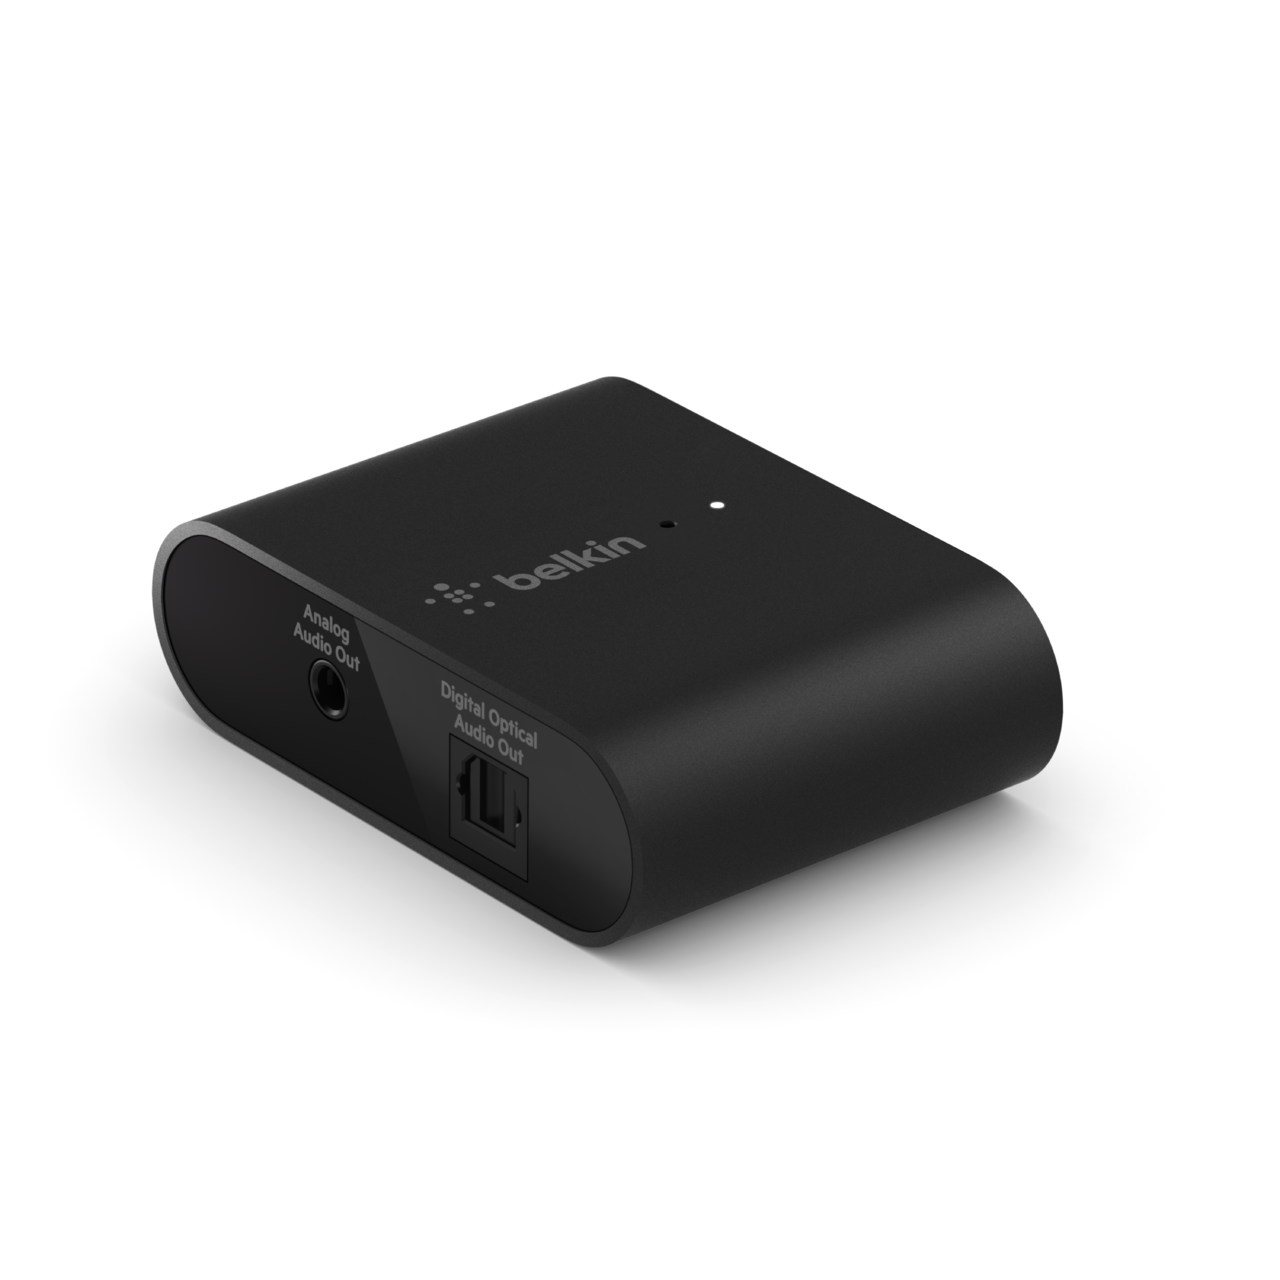 Belkin Audio Adapter with Airplay 2